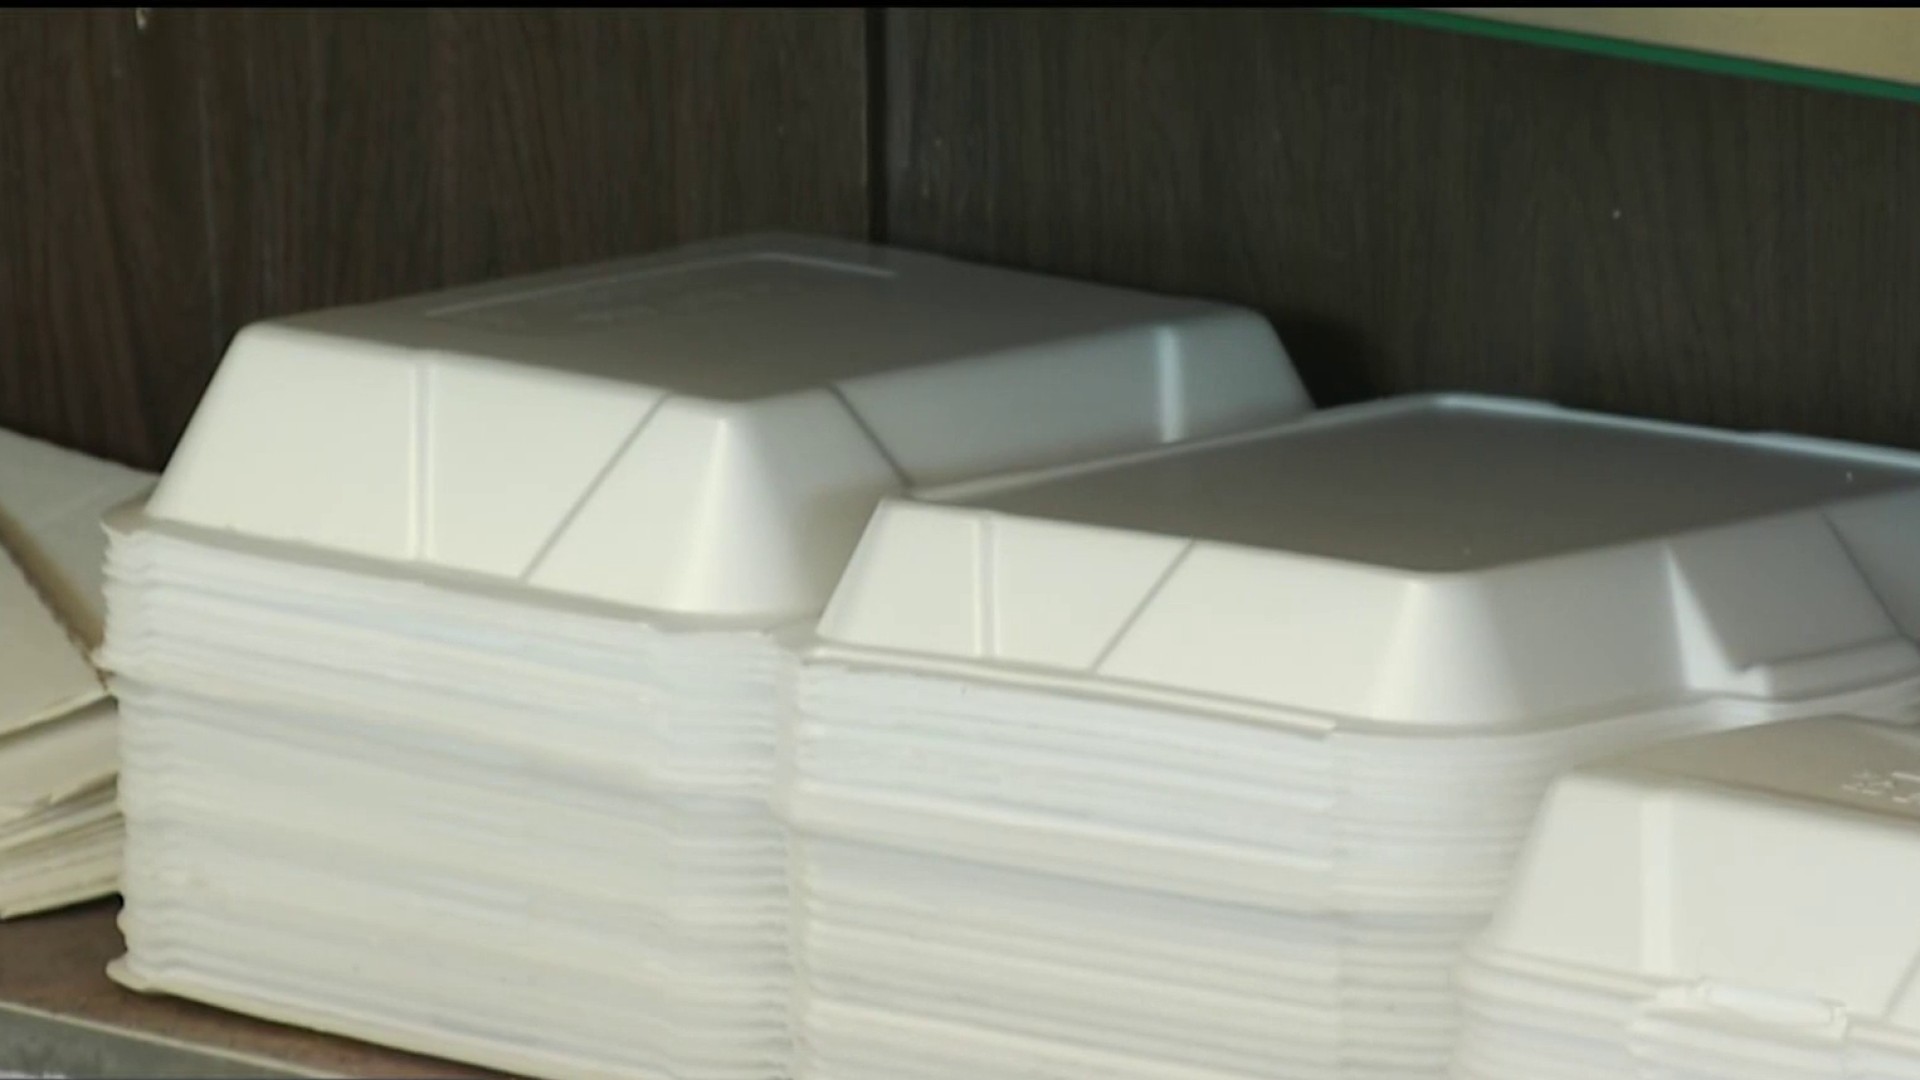 Plate Lunch Be Gone: Styrofoam To-Go Plates Banned In Major City